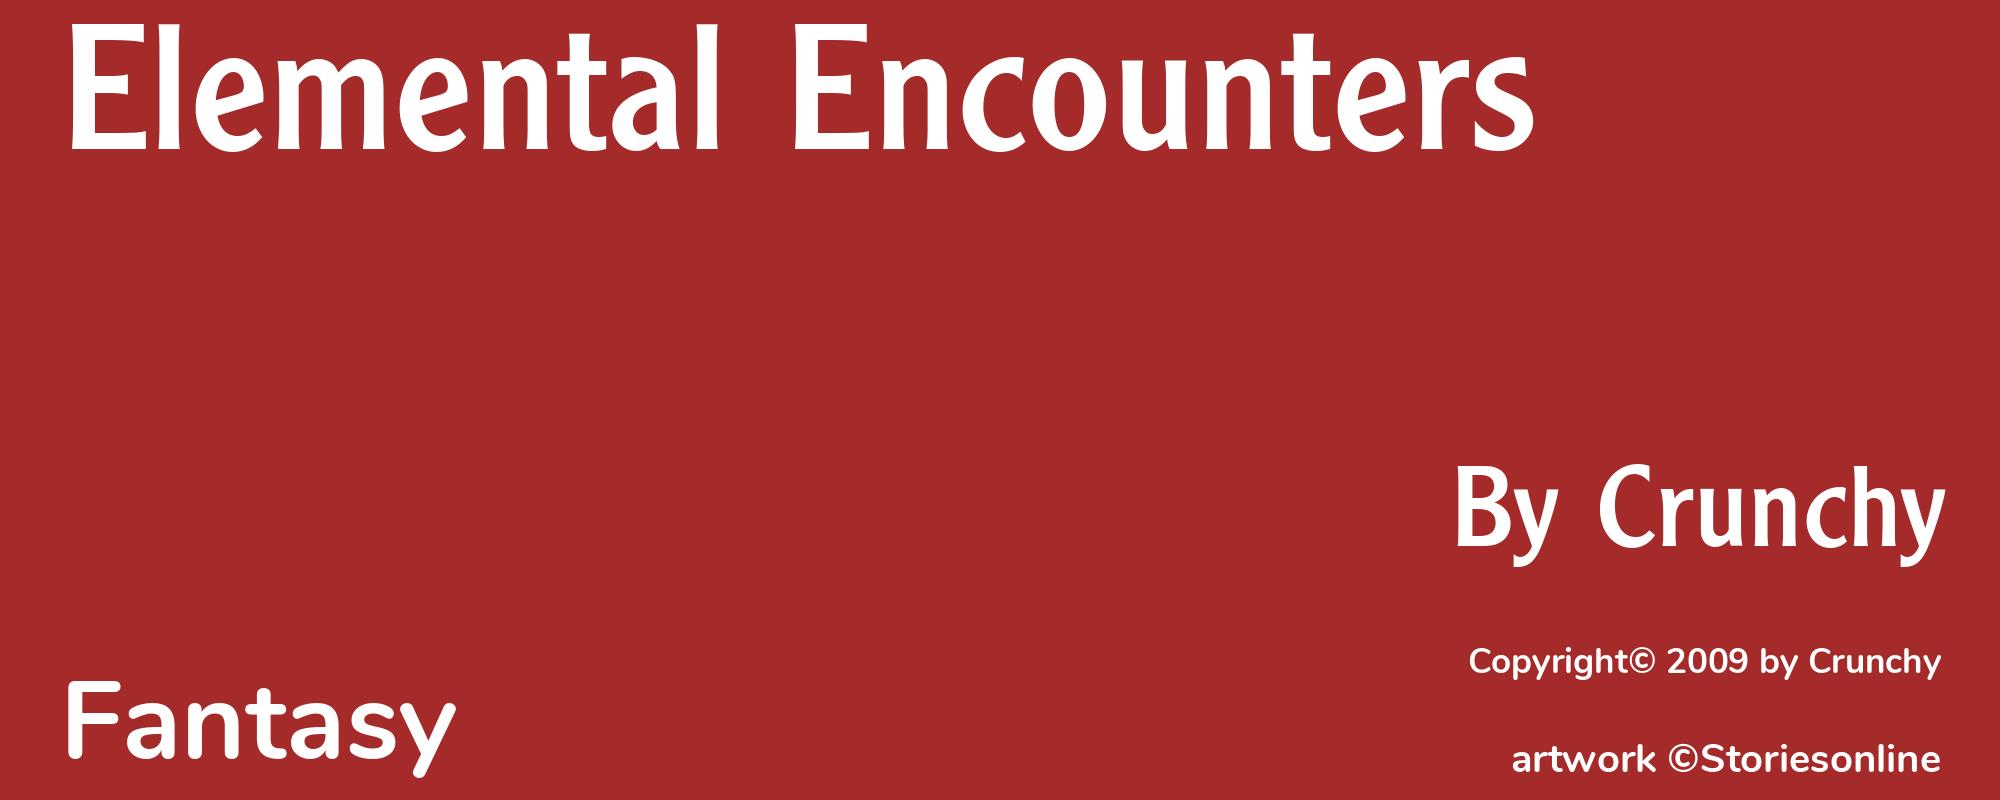 Elemental Encounters - Cover